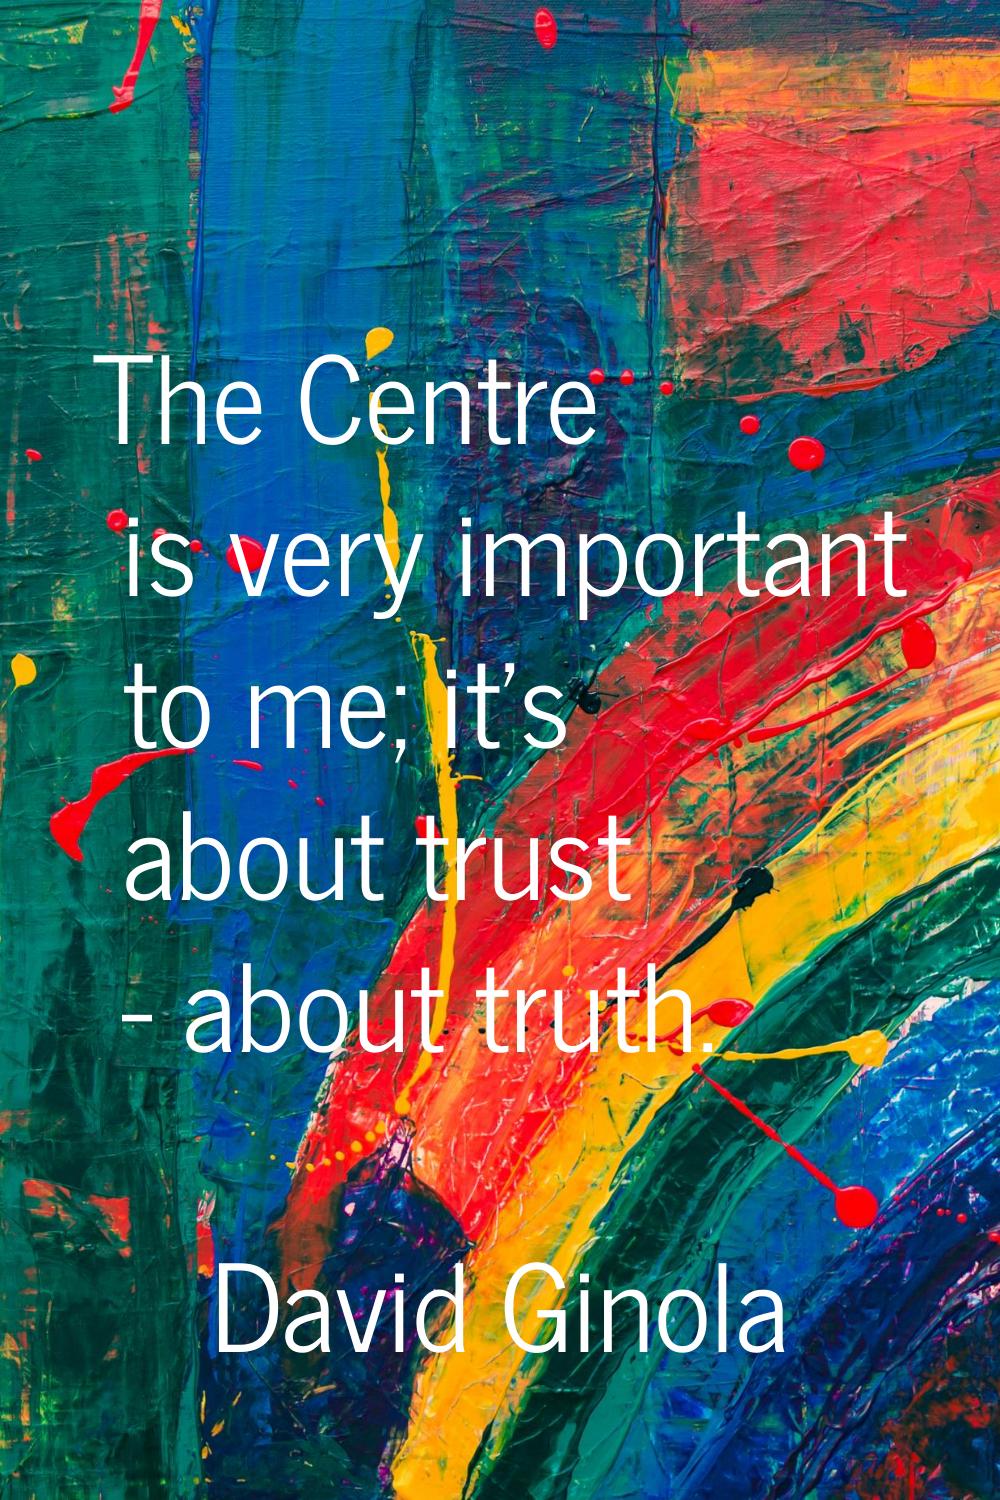 The Centre is very important to me; it's about trust - about truth.